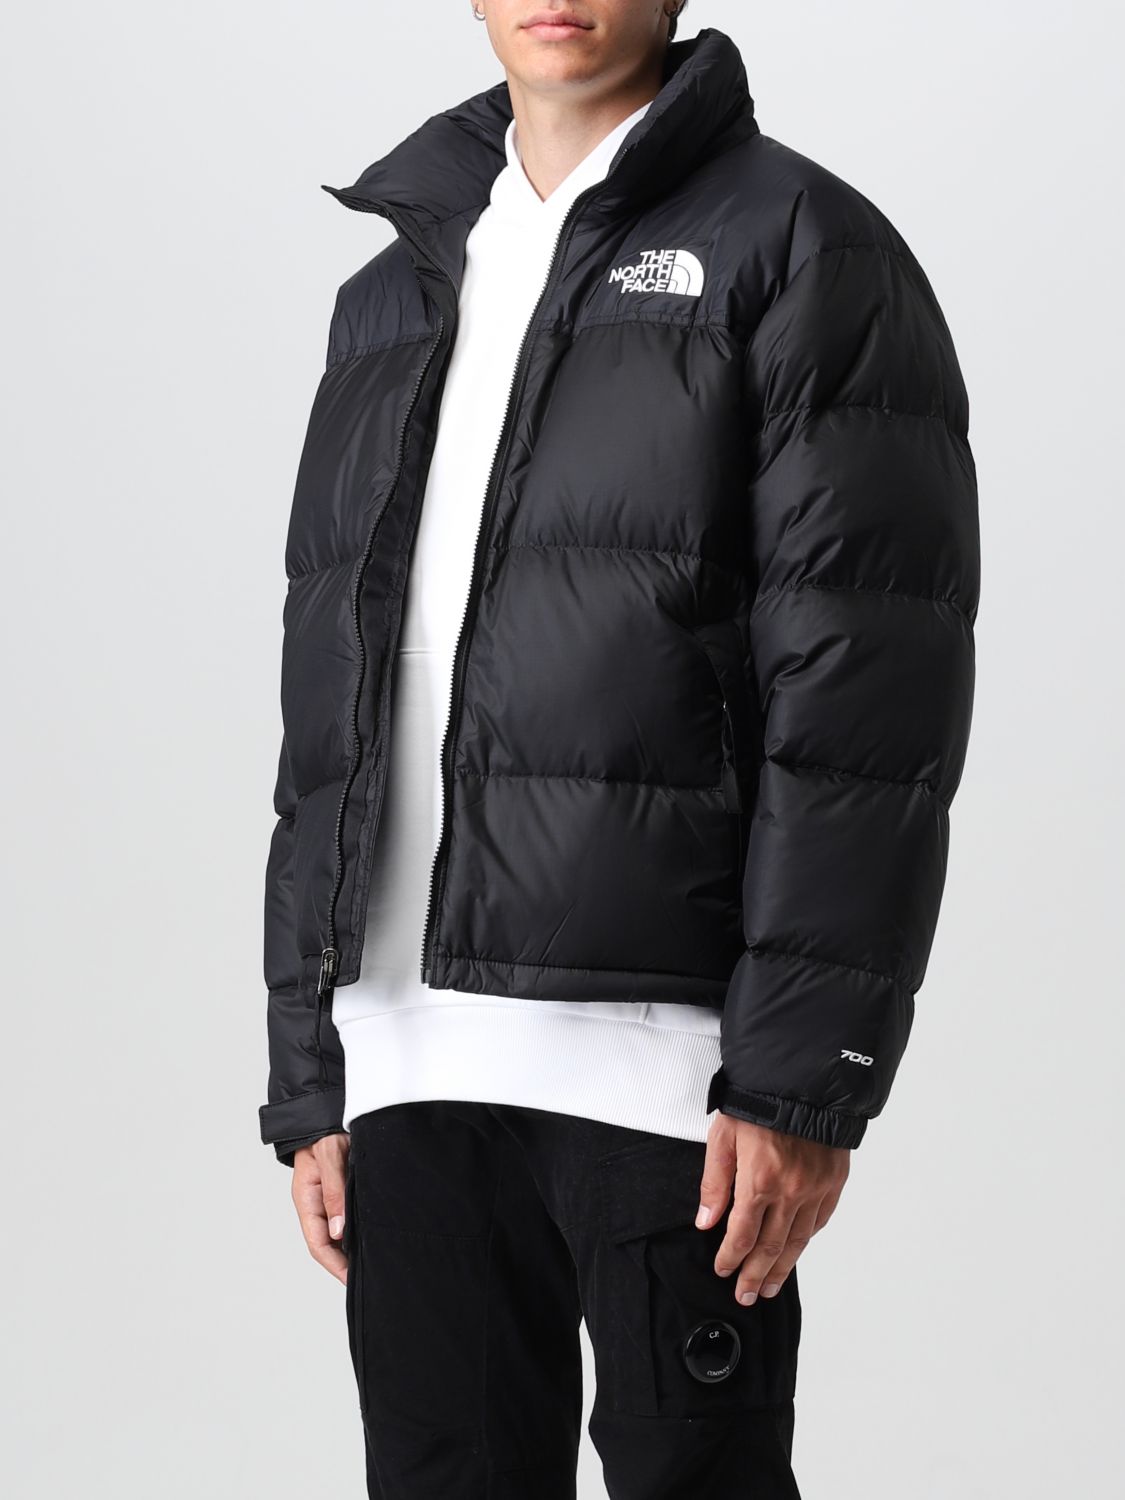 THE NORTH FACE: jacket for man - Black | The North Face jacket NF0A3C8D ...